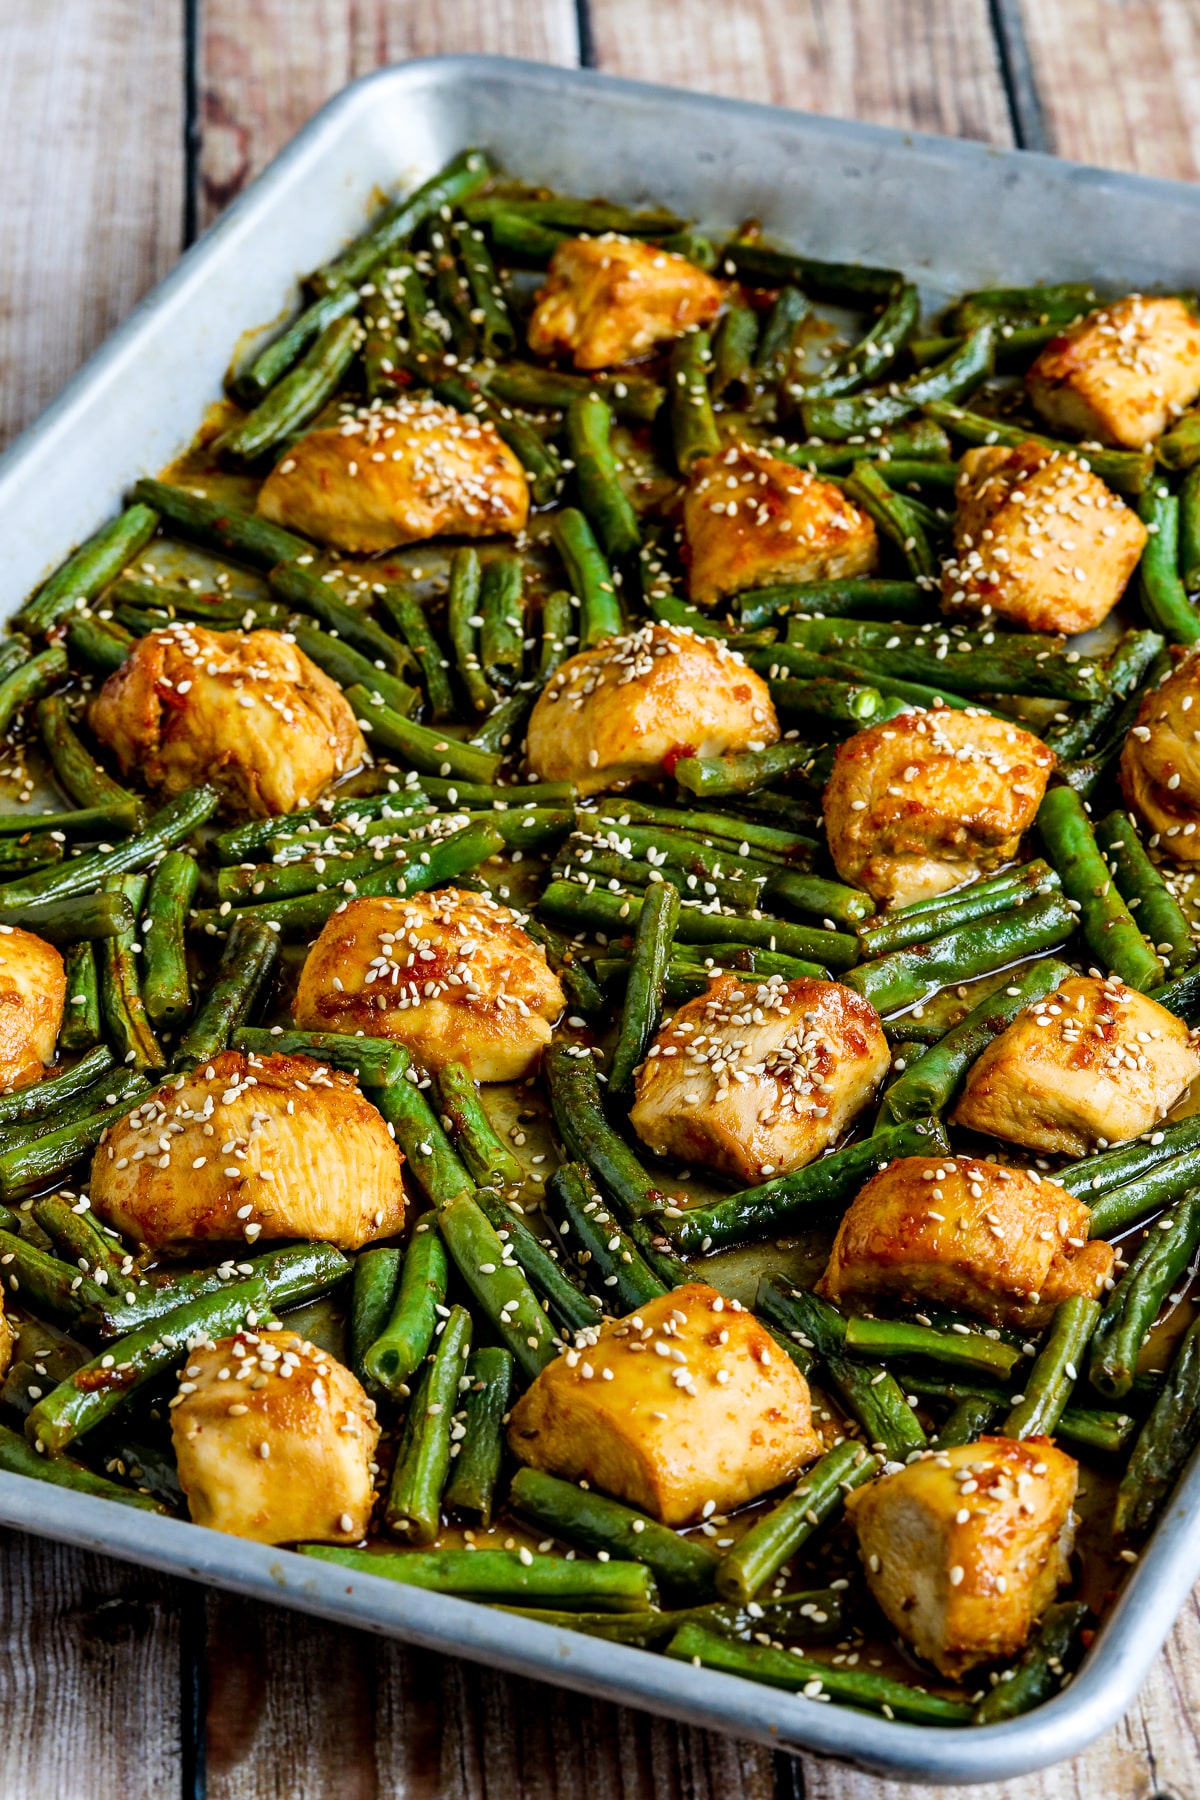 Asian Chicken and Green Beans Sheet Pan Meal shown on sheet pan, second photo.